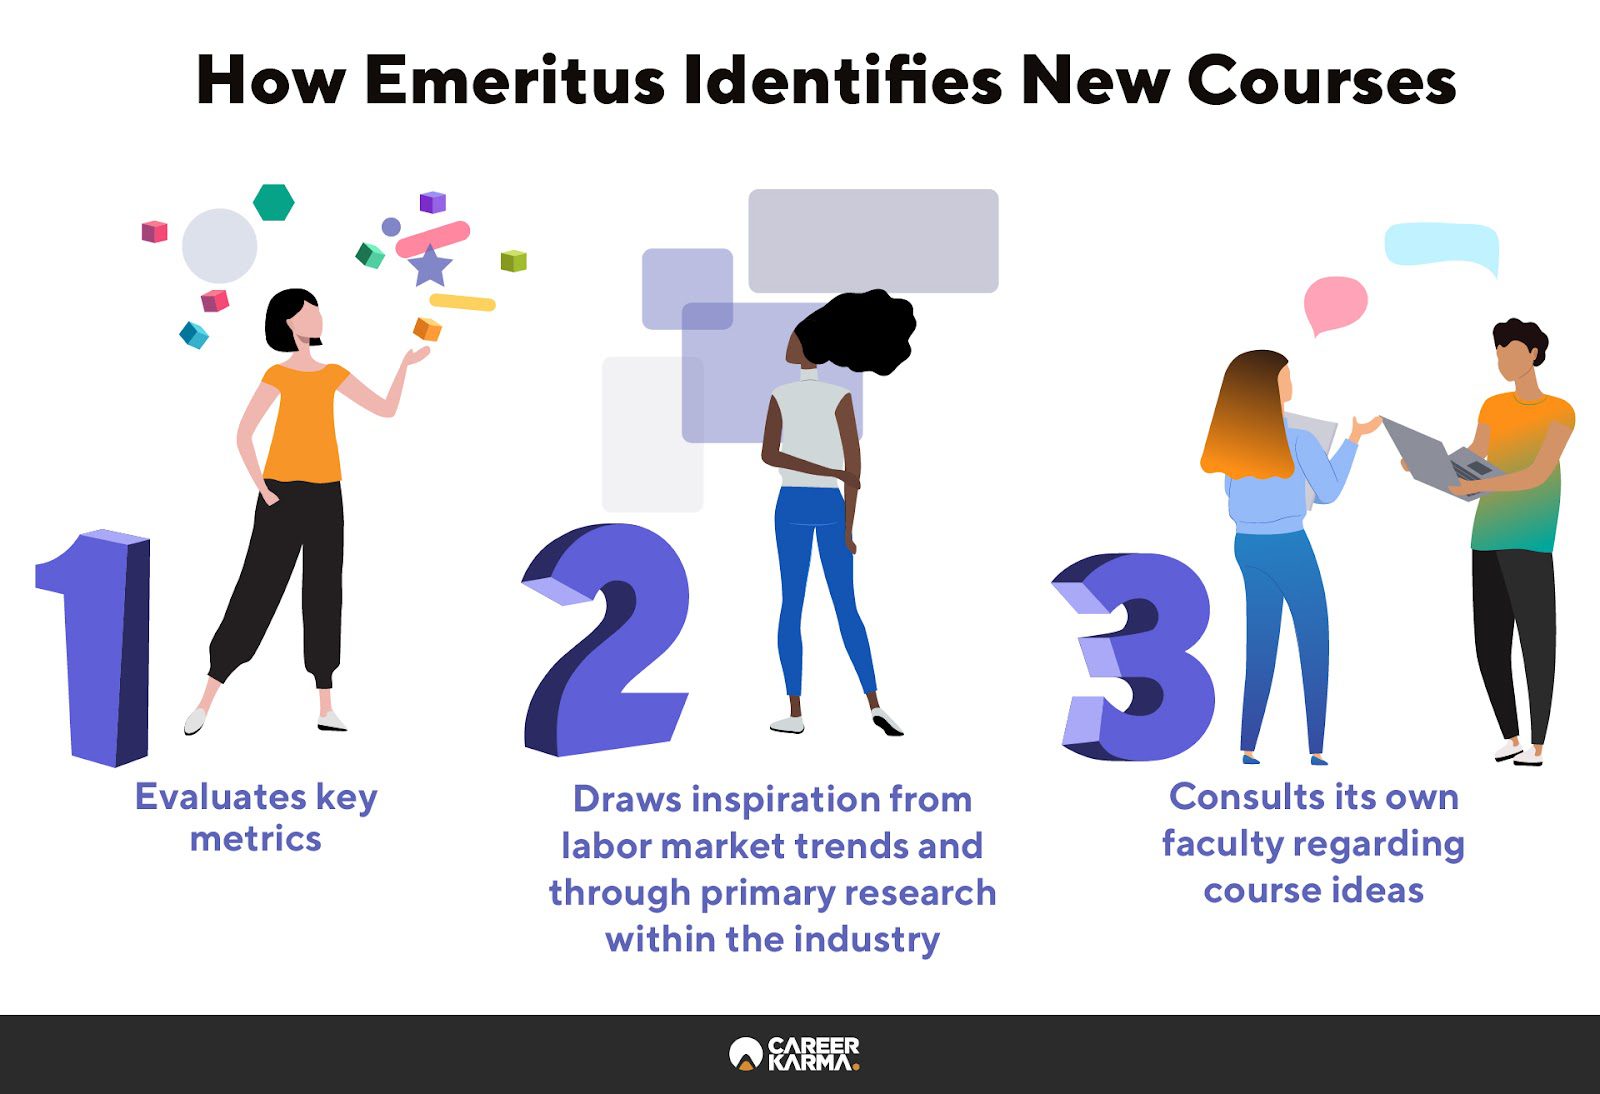 An infographic highlighting how Emeritus identifies new courses to create